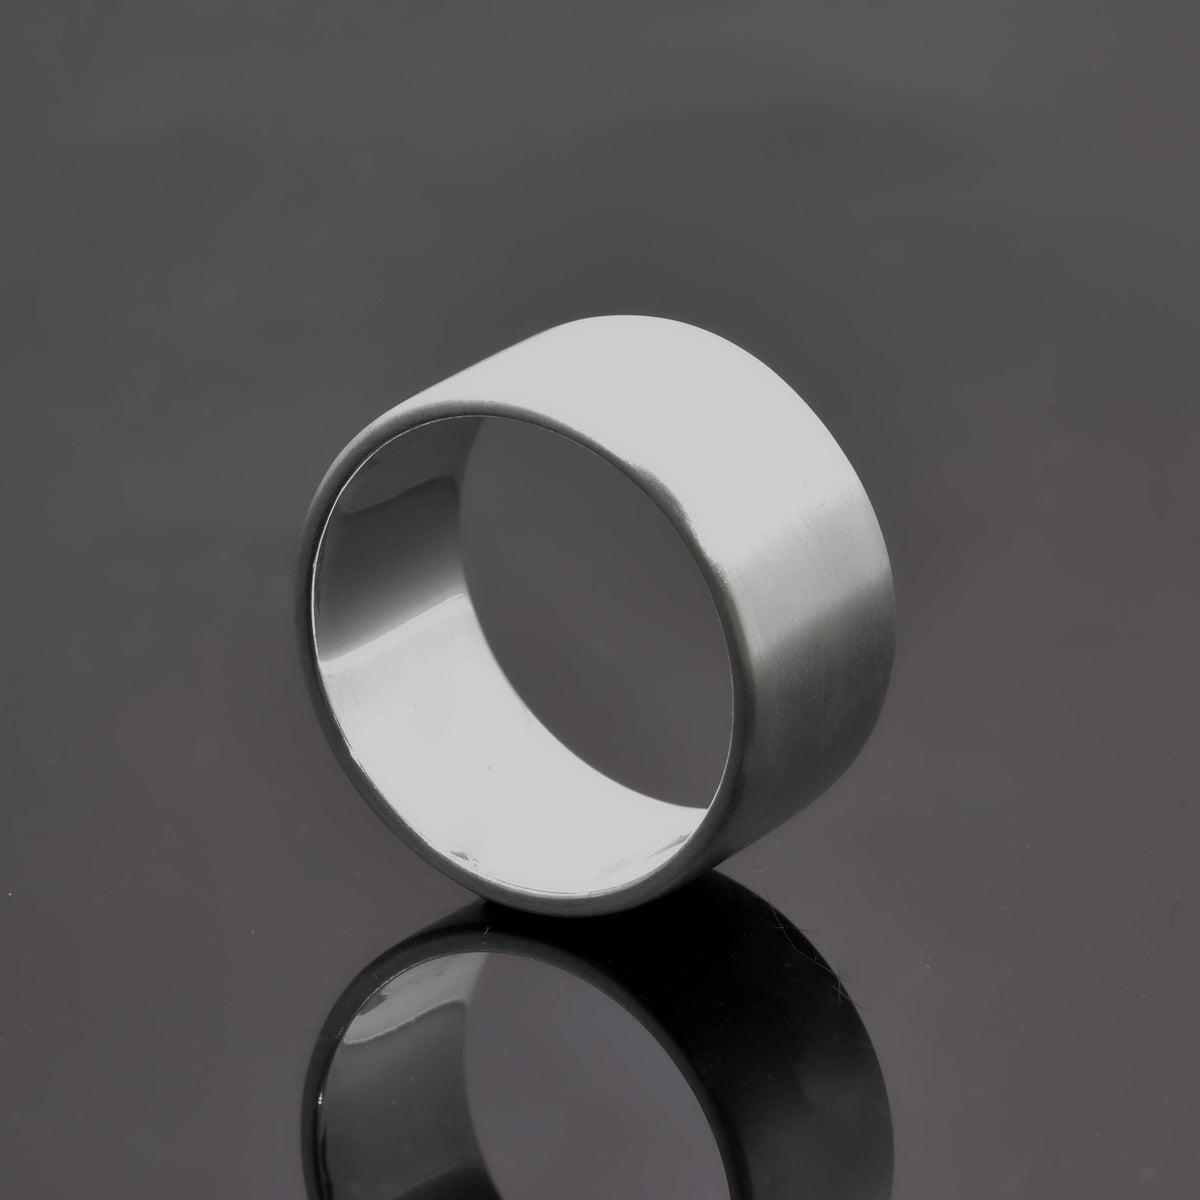 &quot;Echoes of Elegance: The Artisanal Sterling Silver Tube Ring - An Unparalleled Blend of Style, Substance, and Svelte Craftsmanship&quot;